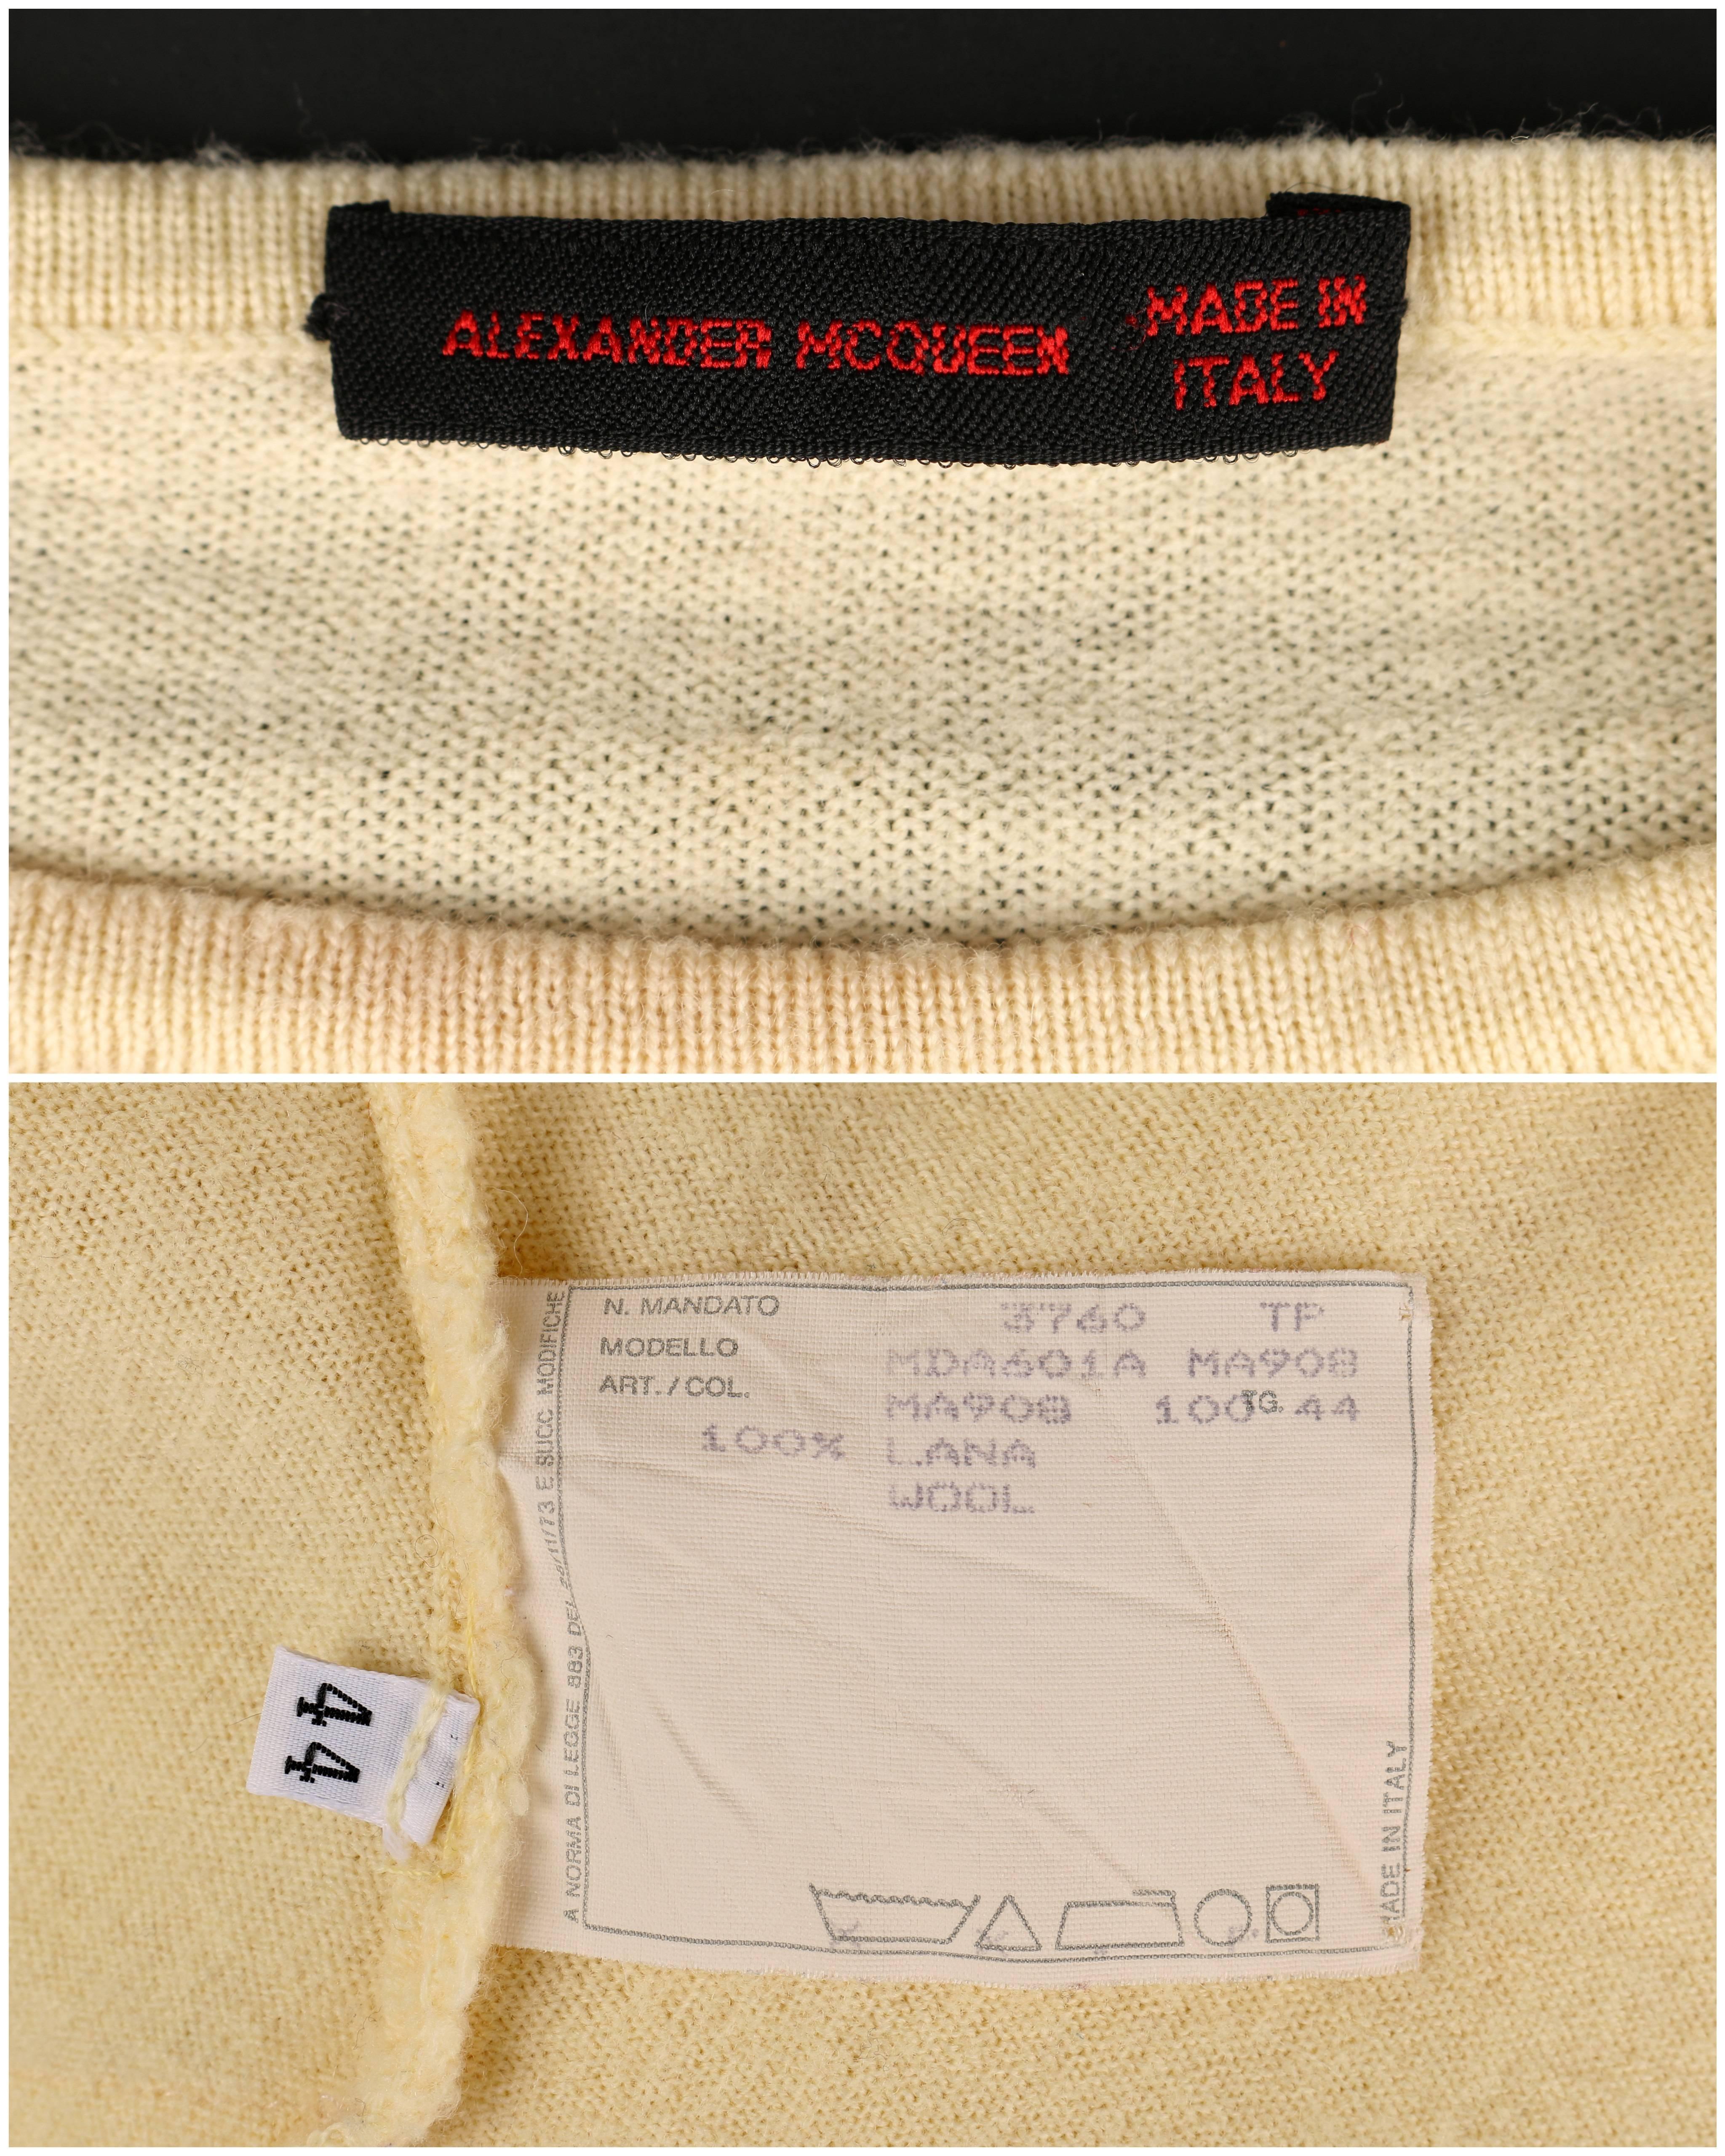 ALEXANDER McQUEEN c1998 Early Pale Yellow Wool Knit Balloon Cuff Sweater Size 44 For Sale 5